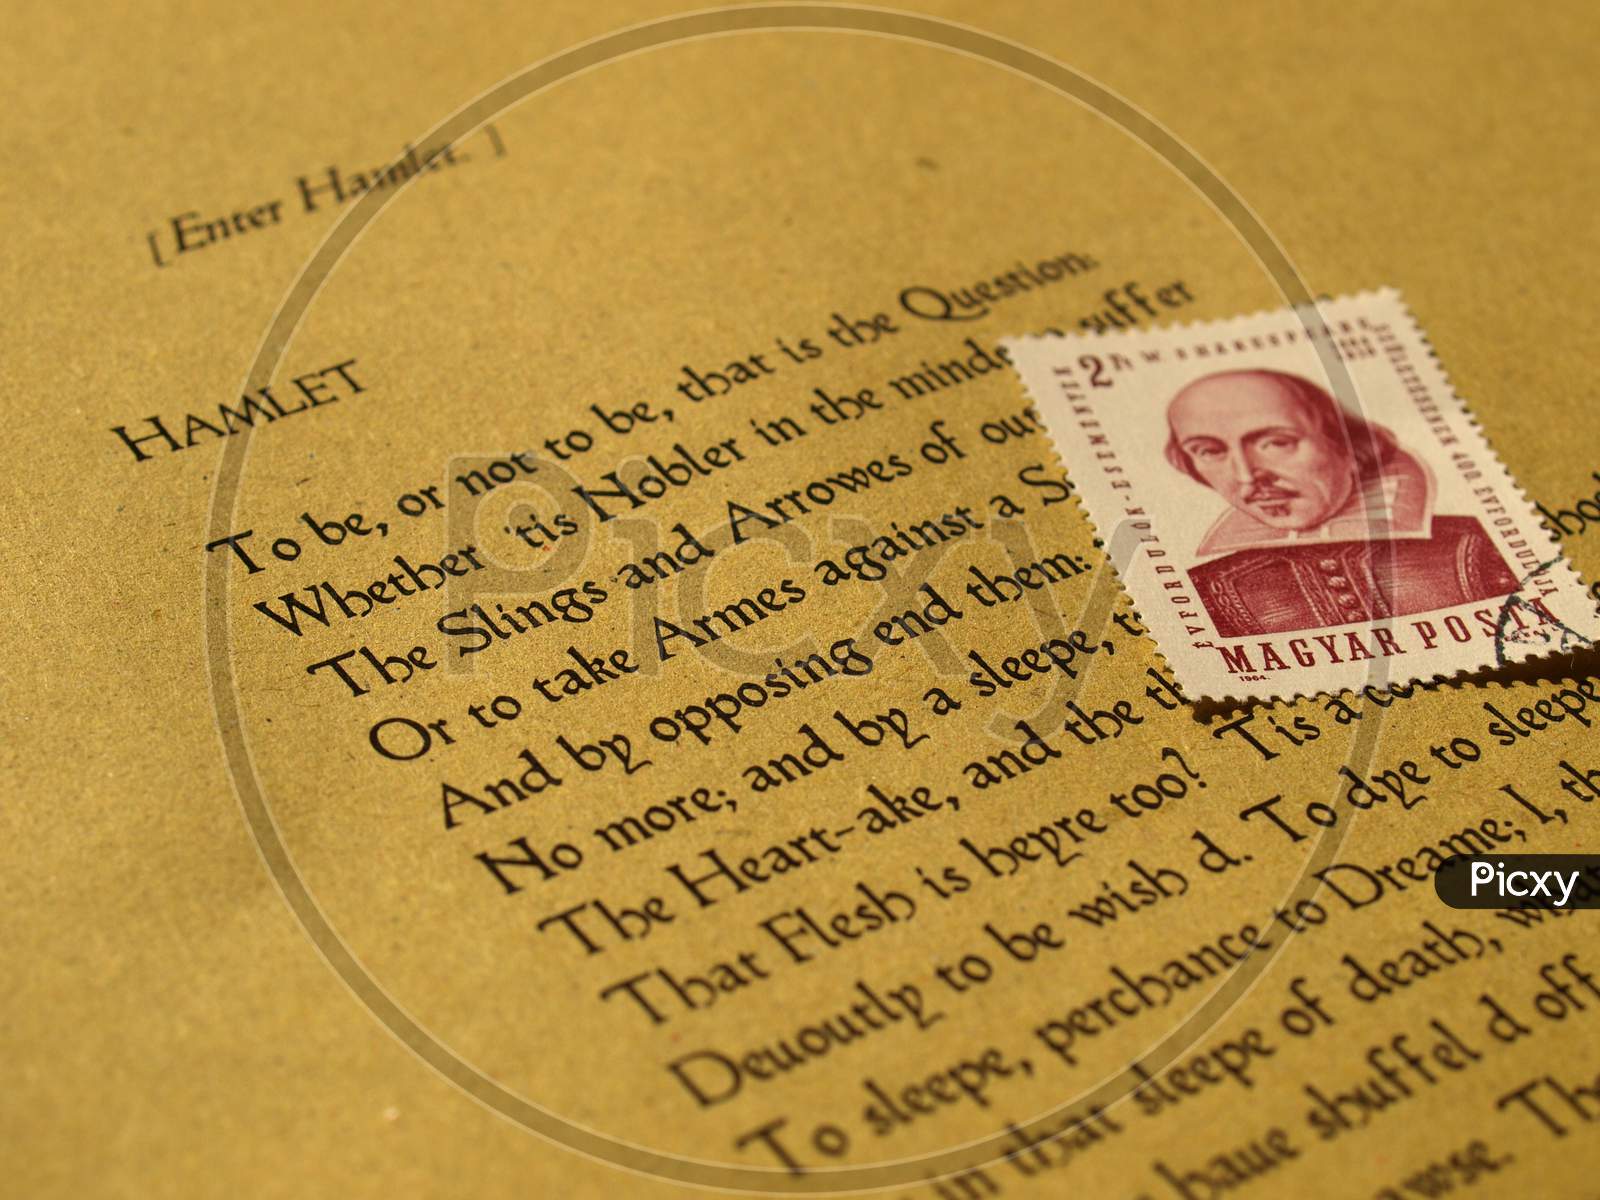 London, Uk - Circa 2009: William Shakespeare'S Hamlet (Original Middle English Text From The First Folio Of 1623) With Stamp - Selective Focus